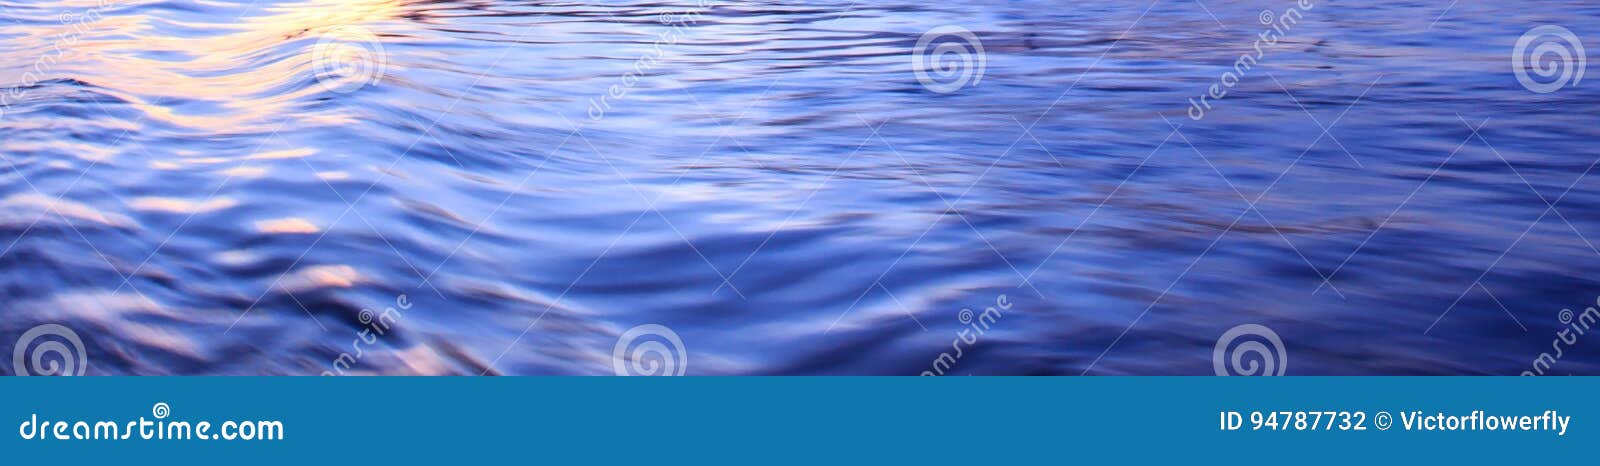 light reflection on blue river wave ripples surface. abstract, tranquility, romance